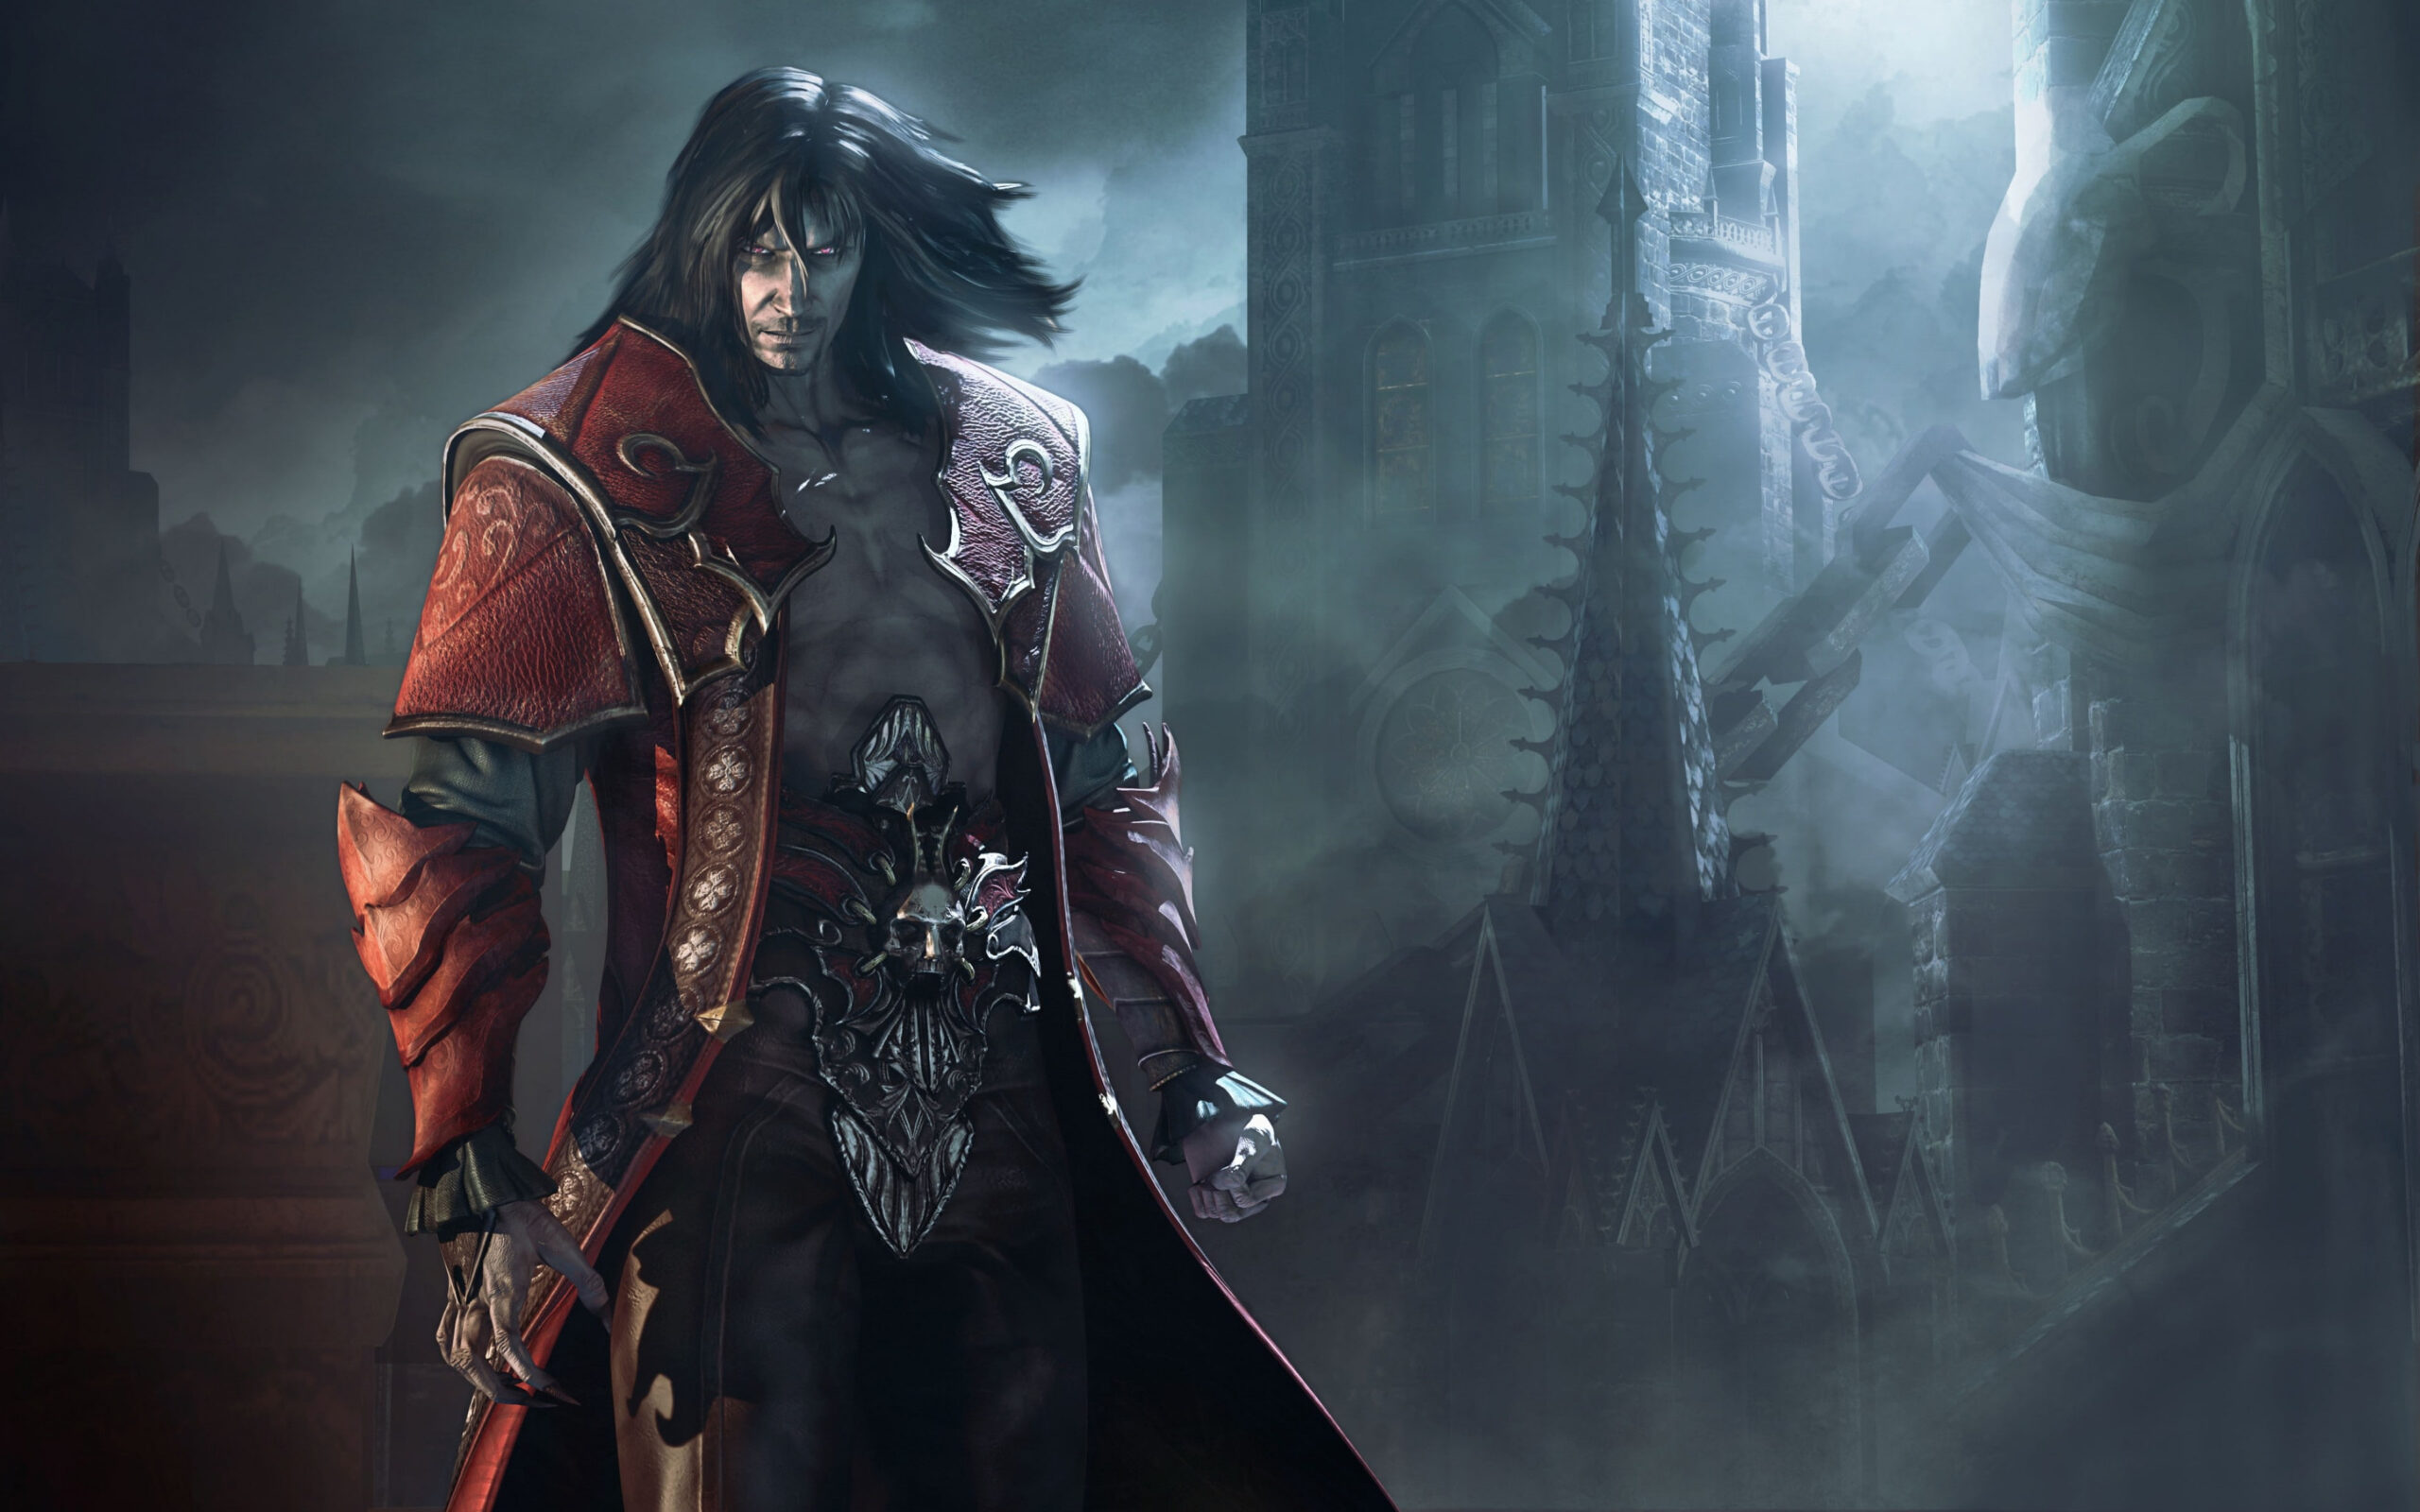 Wallpaper Castlevania Video Game Characters, Castlevania, Anime